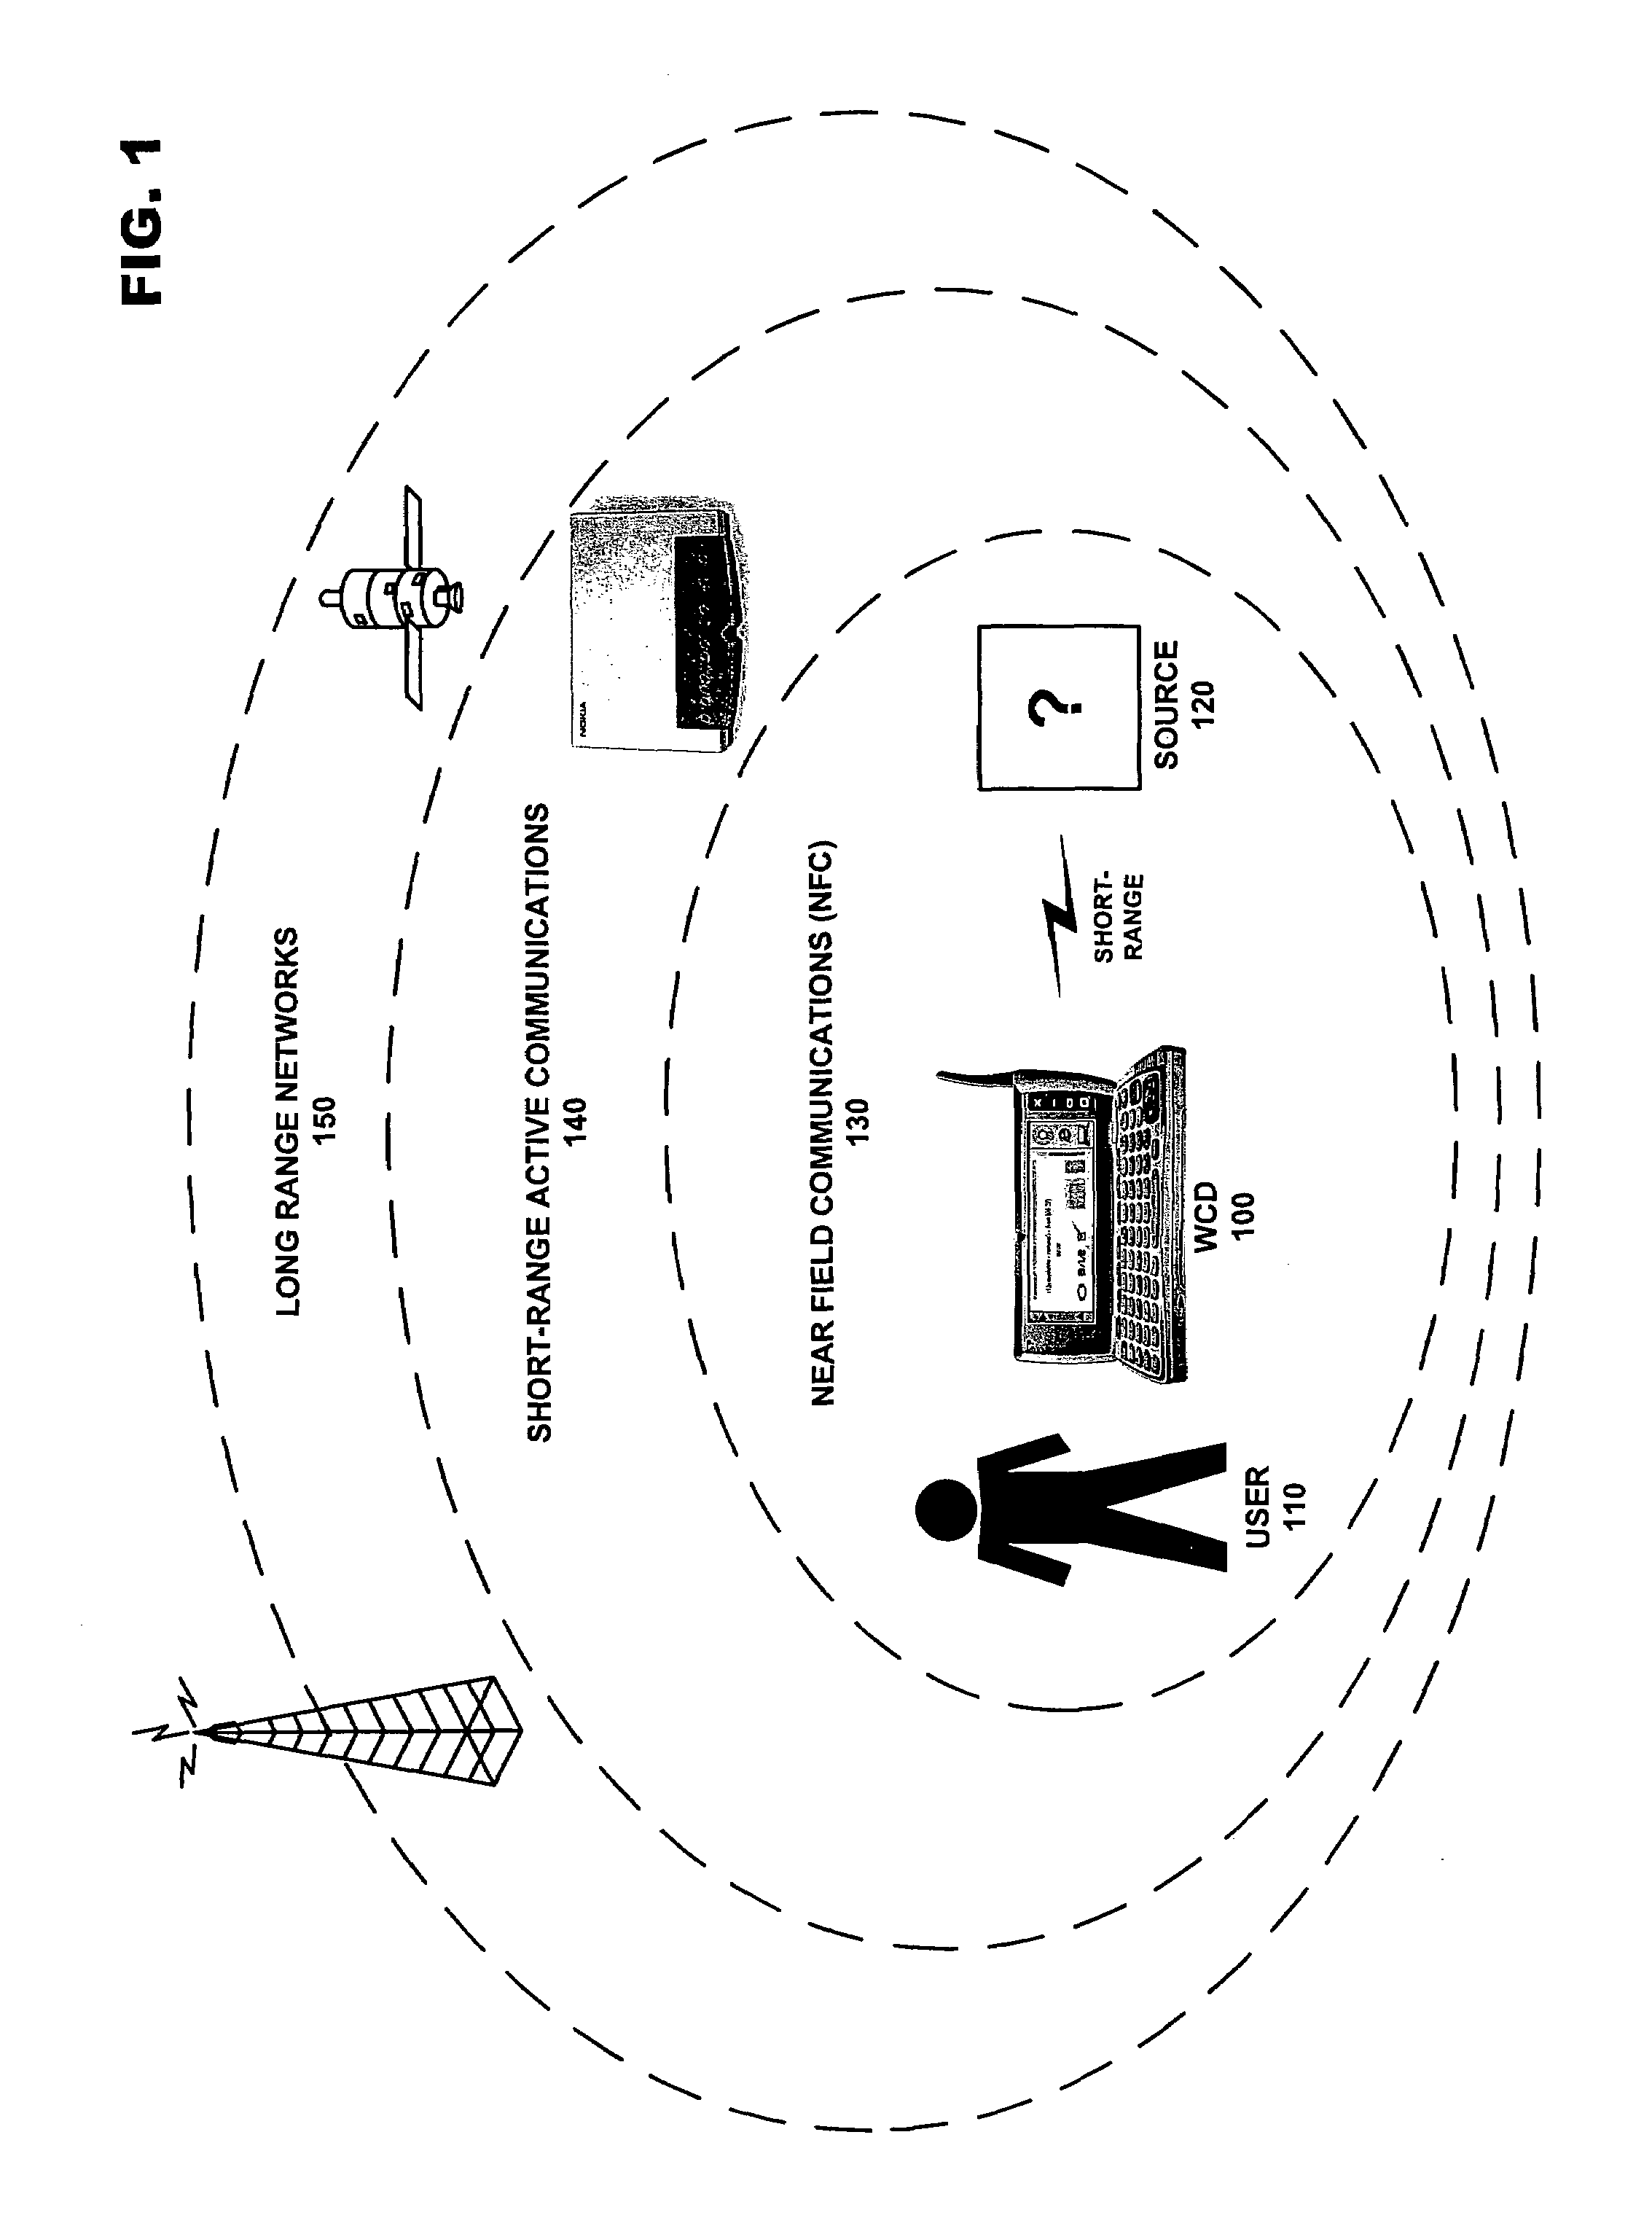 System and methods for direction finding using a handheld device